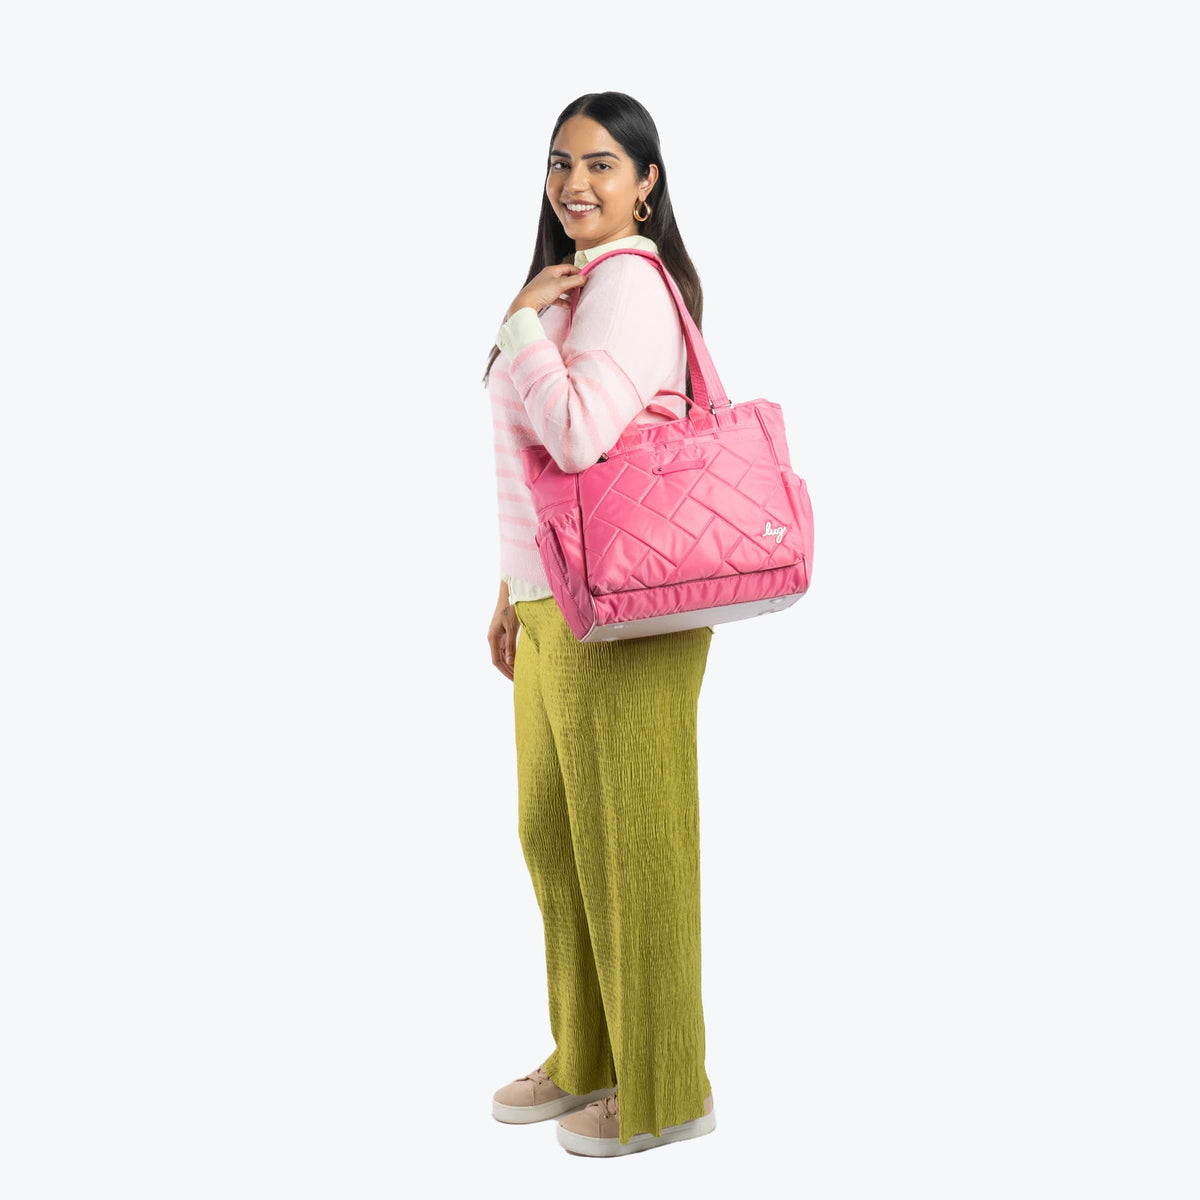 Cabby SE Tote Bag